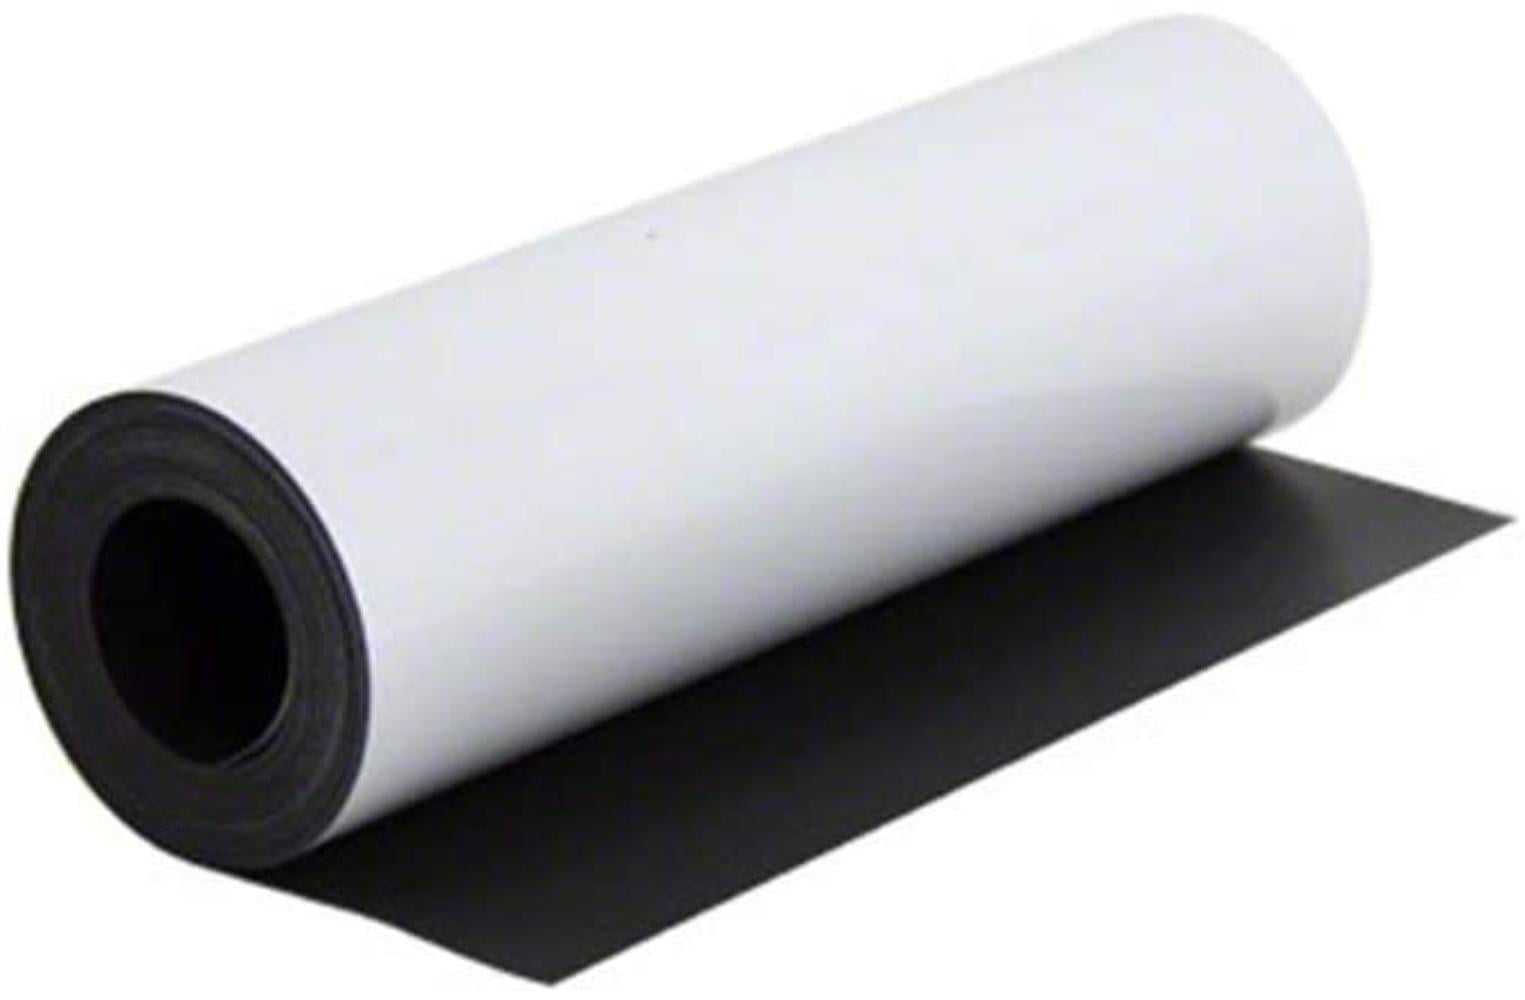 Magnum Magnetic 24"x10 feet .30mil Super Strong Flexible Material 